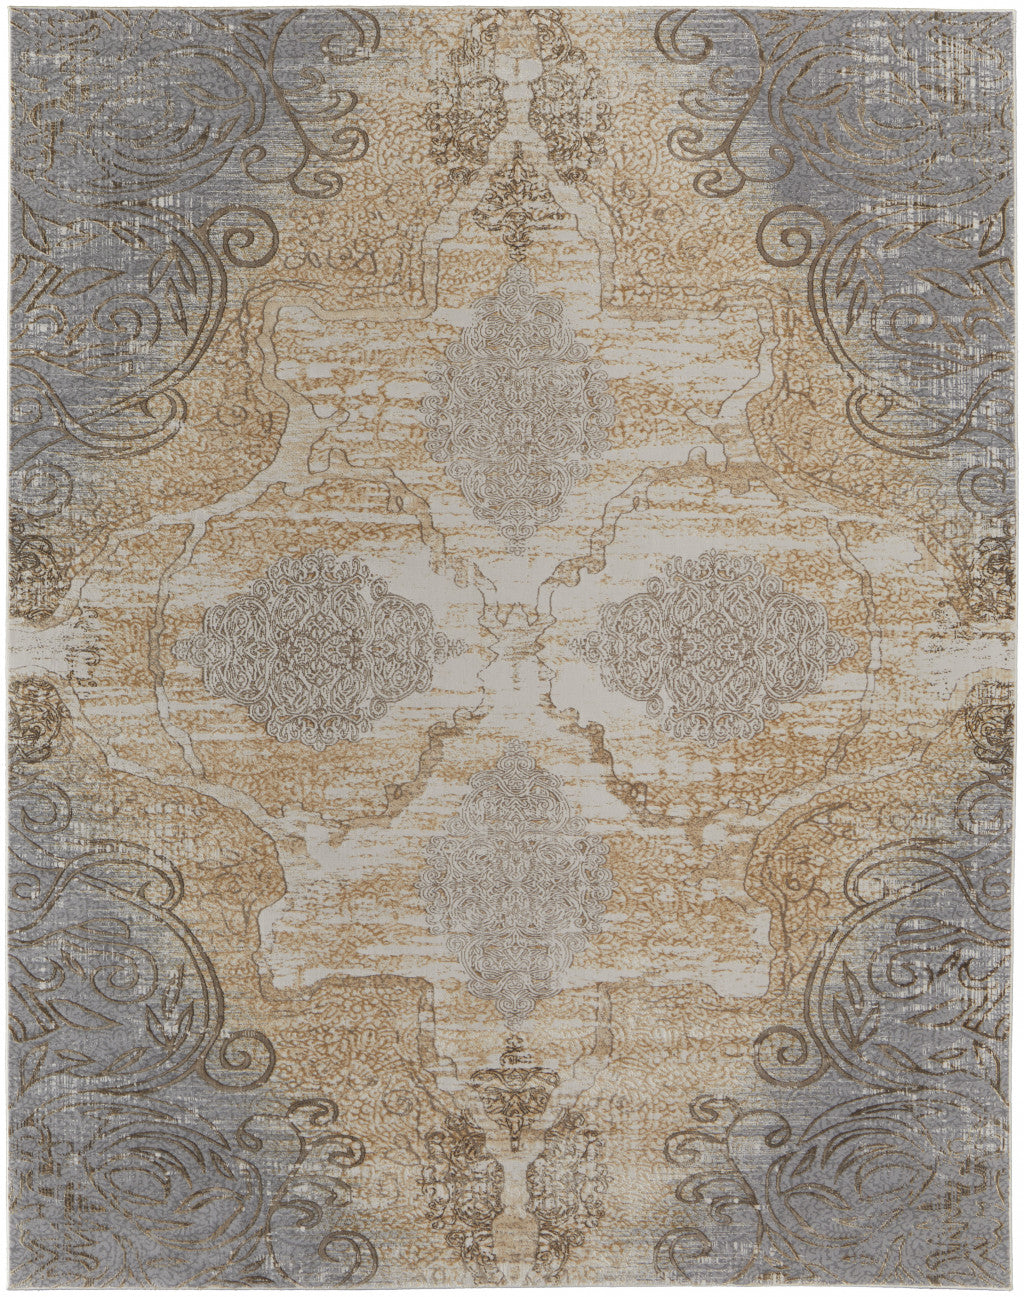 4' X 6' Silver Tan And Gray Floral Power Loom Area Rug